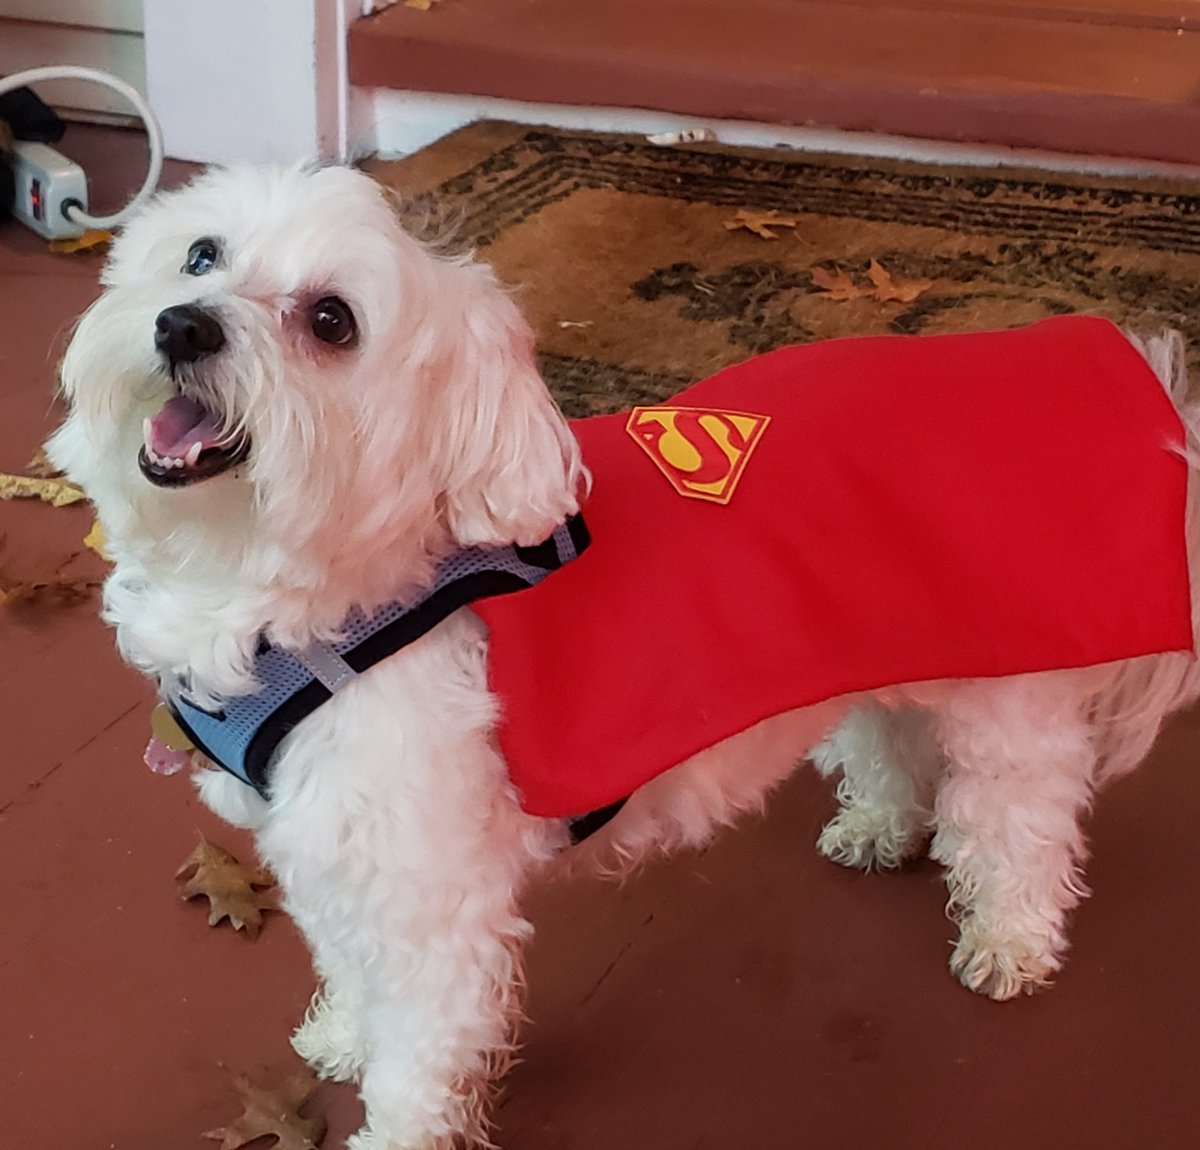 Have a SUPER PET? Celebrate National Pet Month with us (and Cupcake) by posting your furry friend in the comments so we can admire their cuteness too! Bonus points if they've got a #Comicbook inspired name! #BestFriends #SuperPets #cosplay #PetMonth #superhero